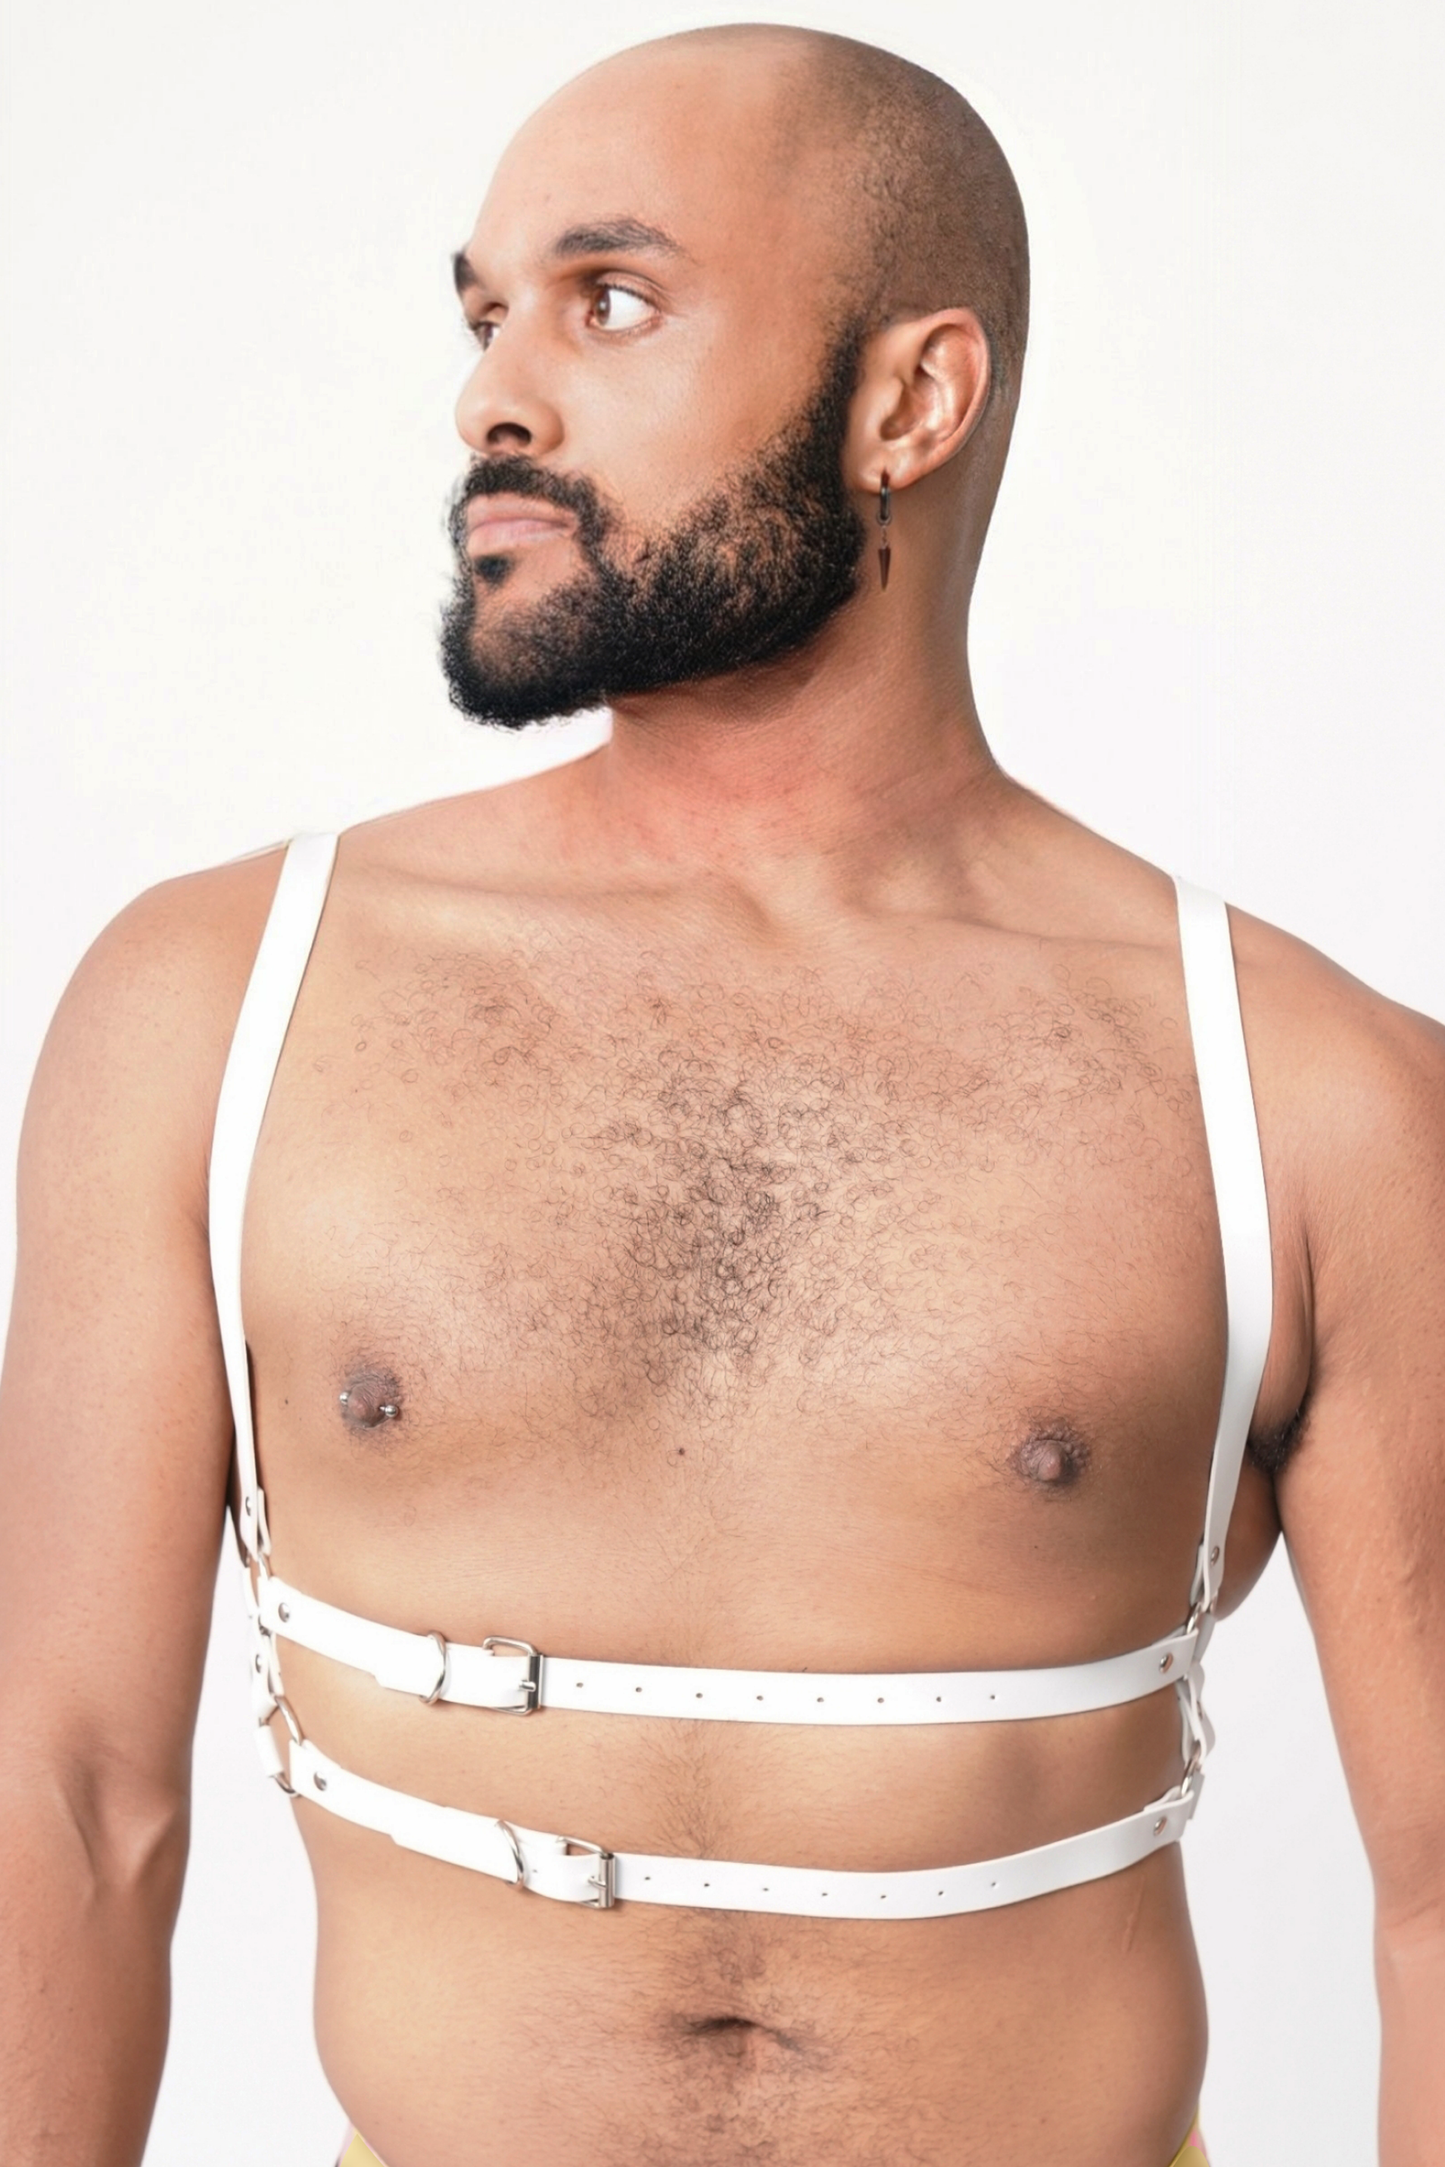 White Sexy Fetish Male Leather Harness, Harness, bdsm harness, fetish harness